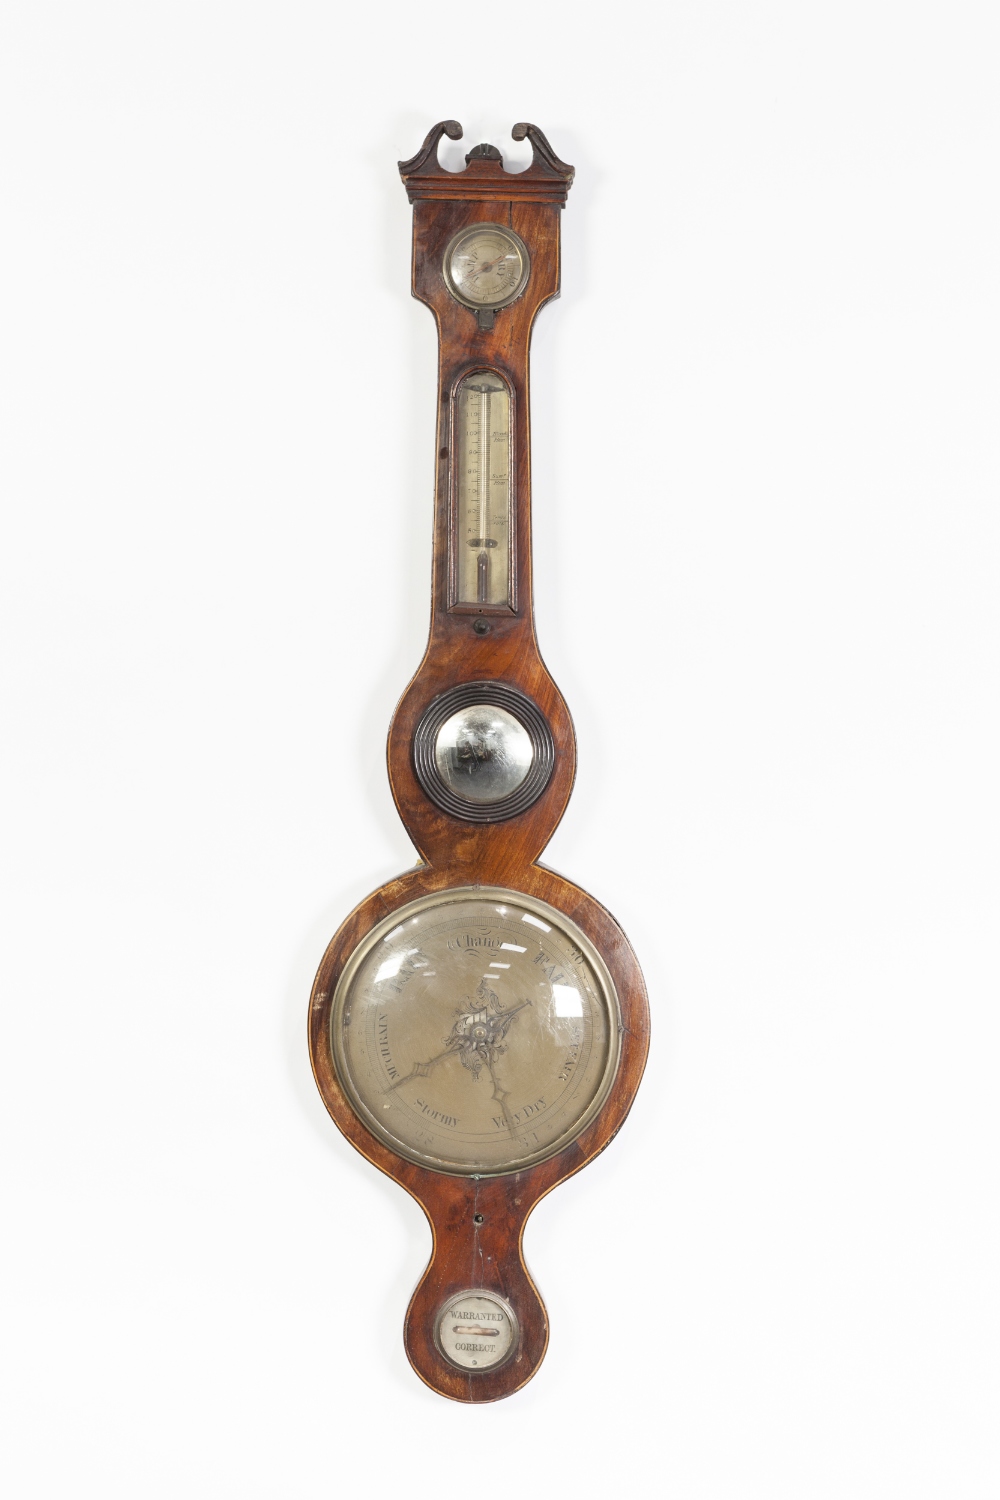 EARLY NINETEENTH CENTURY MAHOGANY AND LINE INLAID BAROMETER, the 8" silvered dial with brass